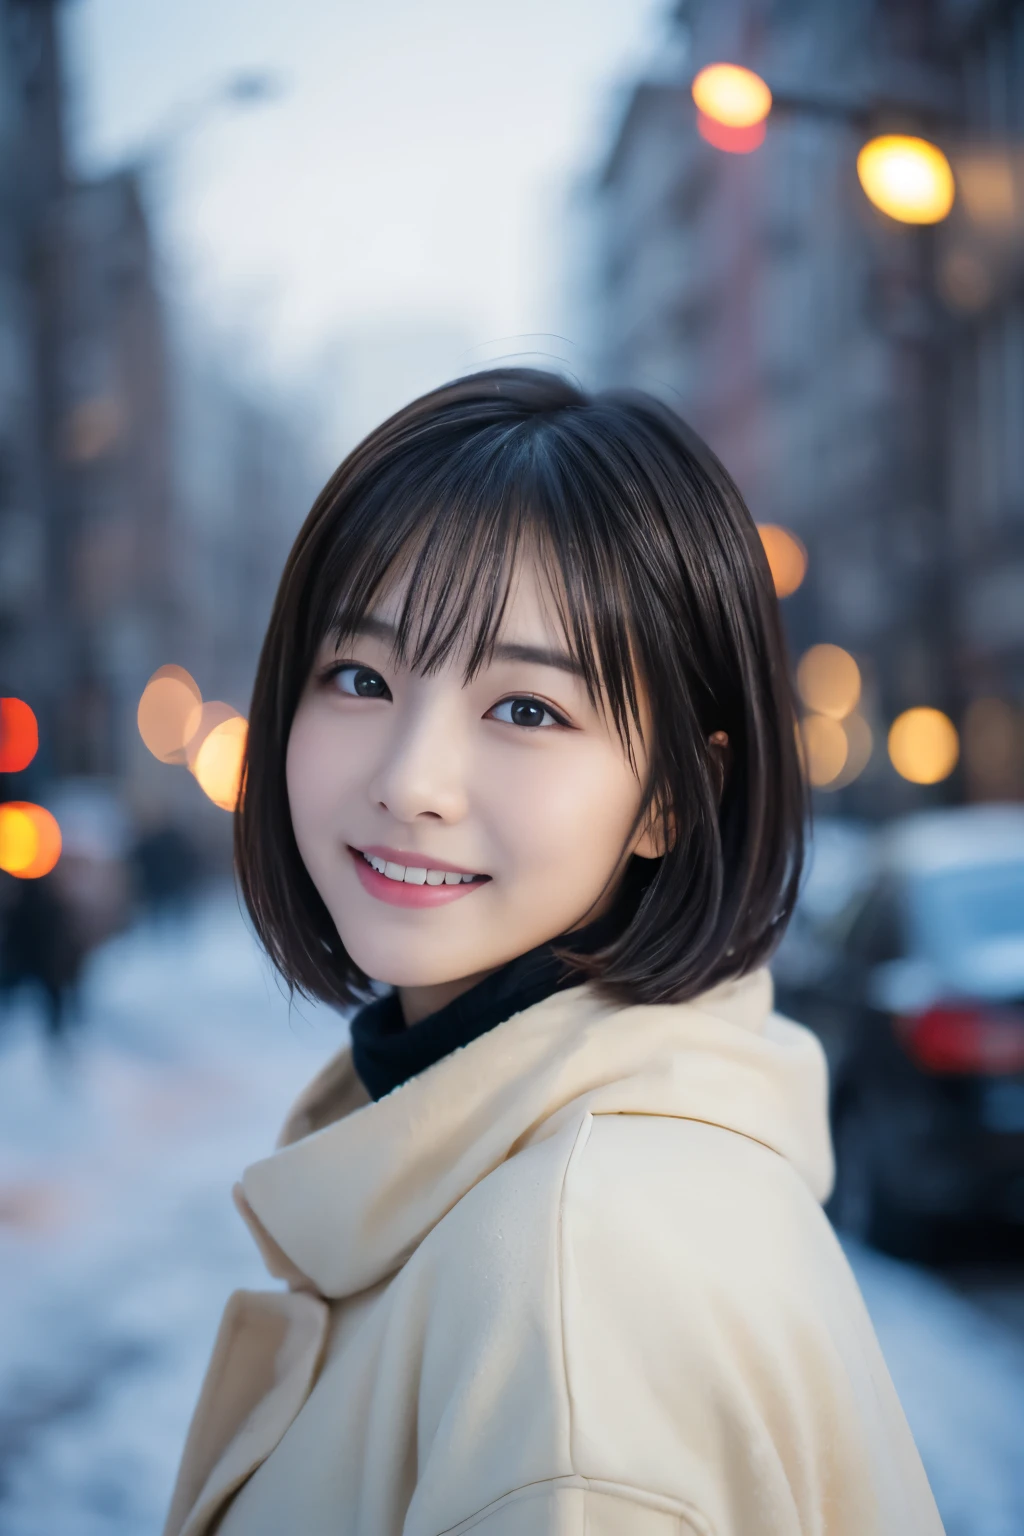 1 girl, (casual winter outfit:1.2), beautiful japanese actress, (15 years old), short hair,
(RAW photo, highest quality), (realistic, Photoreal:1.4), masterpiece, 
very delicate and beautiful, very detailed, 2k wallpaper, wonderful, 
finely, Very detailed CG Unity 8K 壁紙, Super detailed, High resolution, 
soft light, beautiful detailed girl, very detailed目と顔, beautifully detailed nose, beautiful and detailed eyes, cinematic lighting, 
BREAK
(Against the backdrop of a snowy night cityscape 1.3), city lights, 
perfect anatomy, slender body, smile, Face the front completely, look at the camera